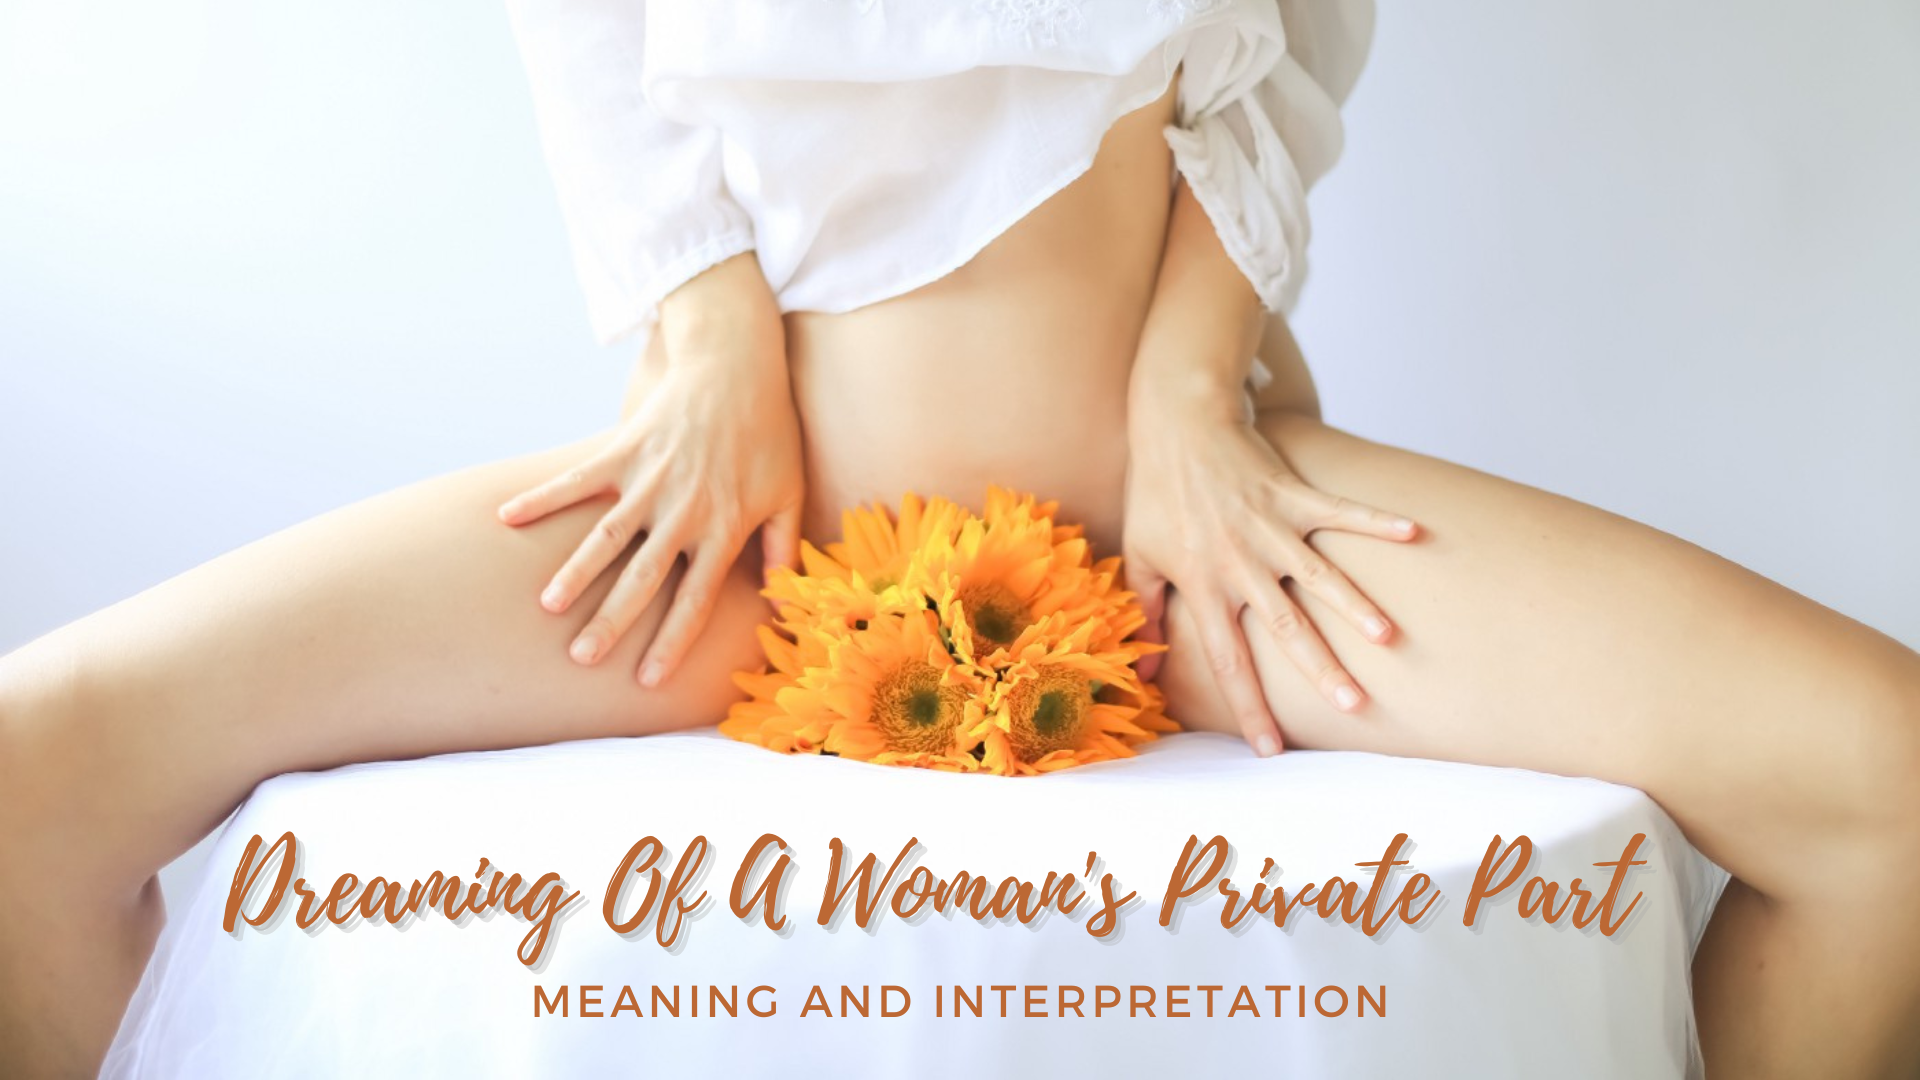 Dreaming Of A Woman's Private Part - Meaning And Interpretation